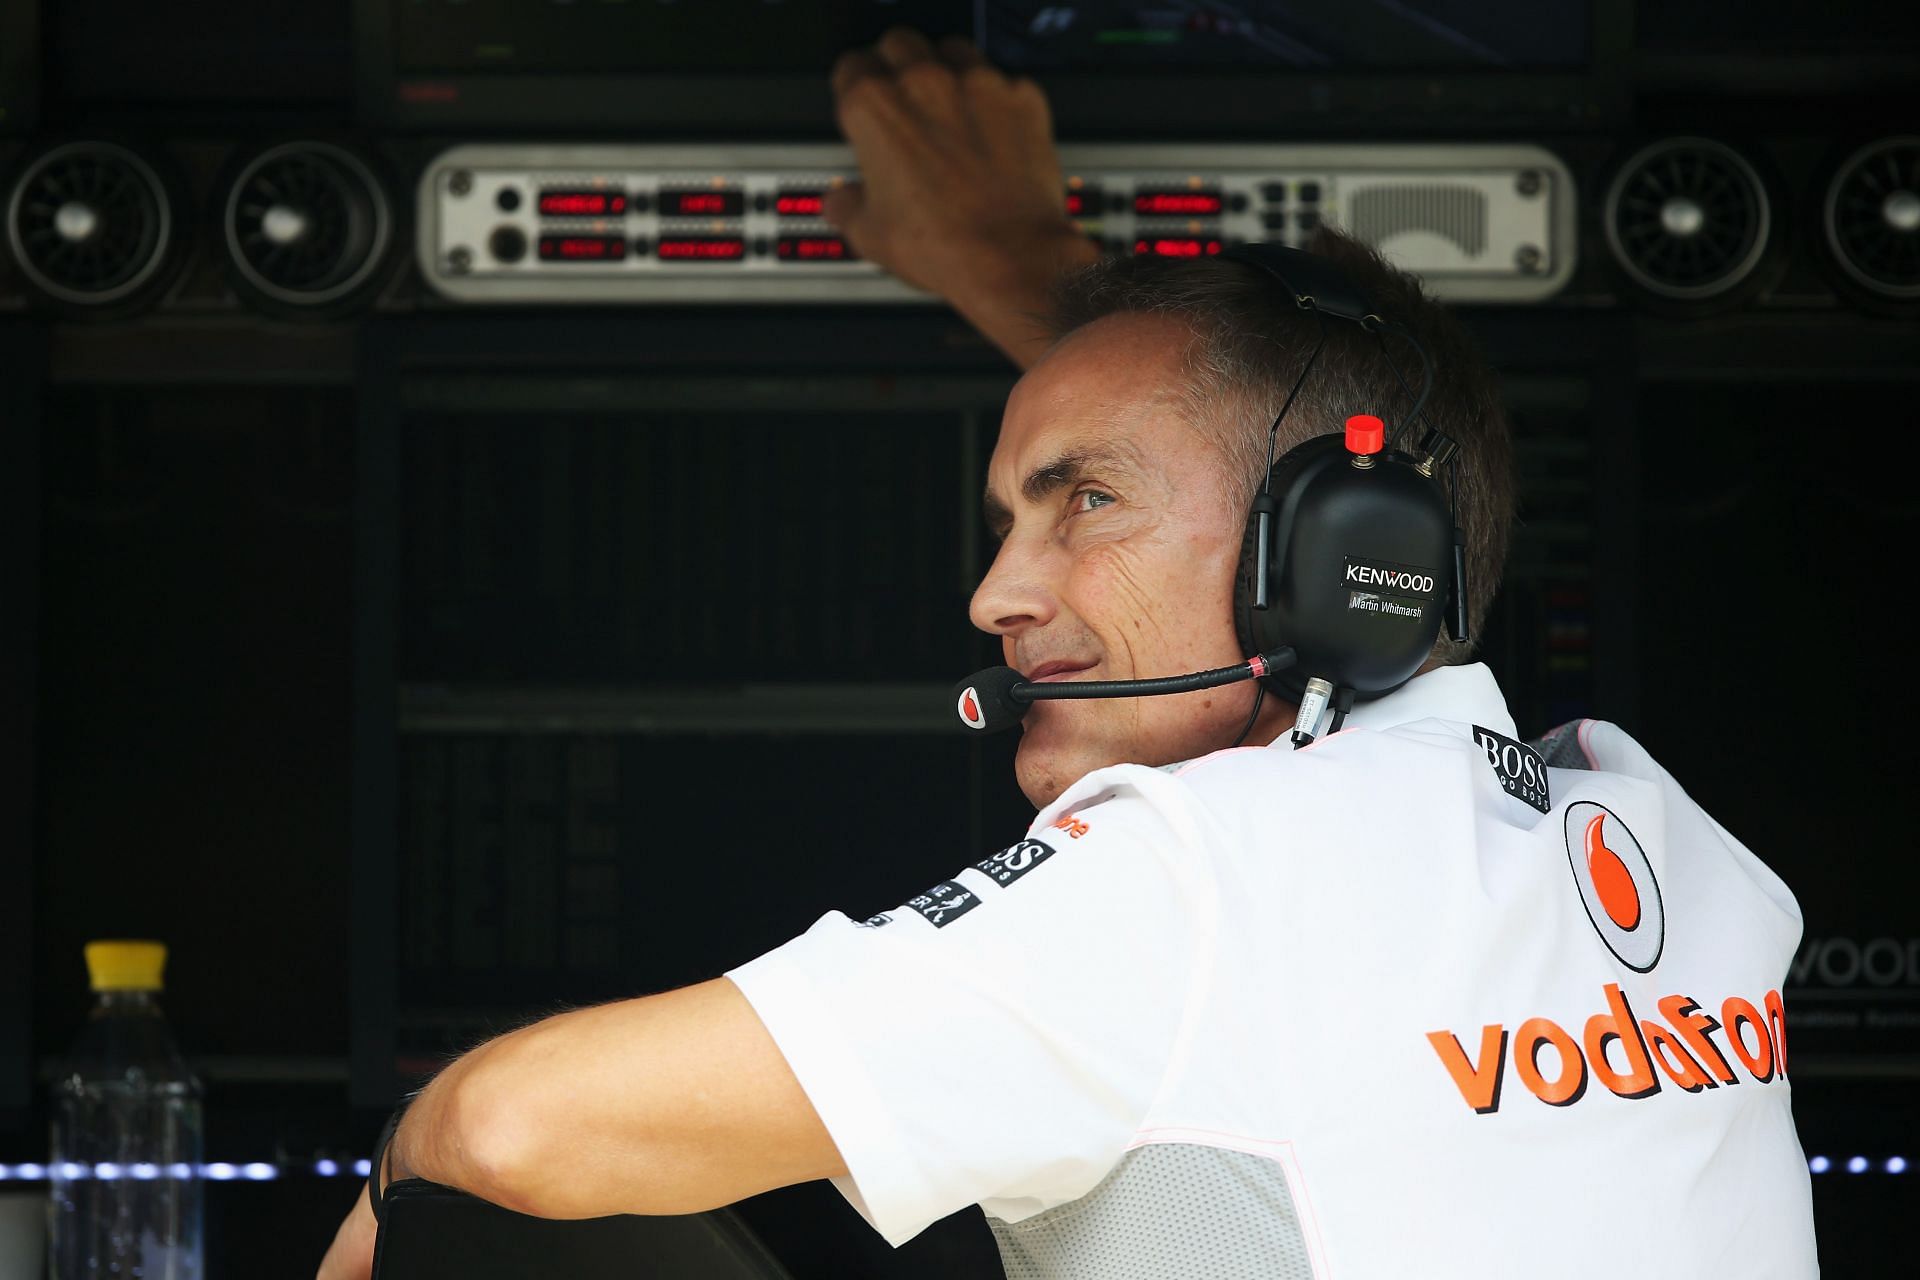 Martin Whitmarsh on the McLaren pit wall at the 2013 Indian Grand Prix (Photo by Mark Thompson/Getty Images)